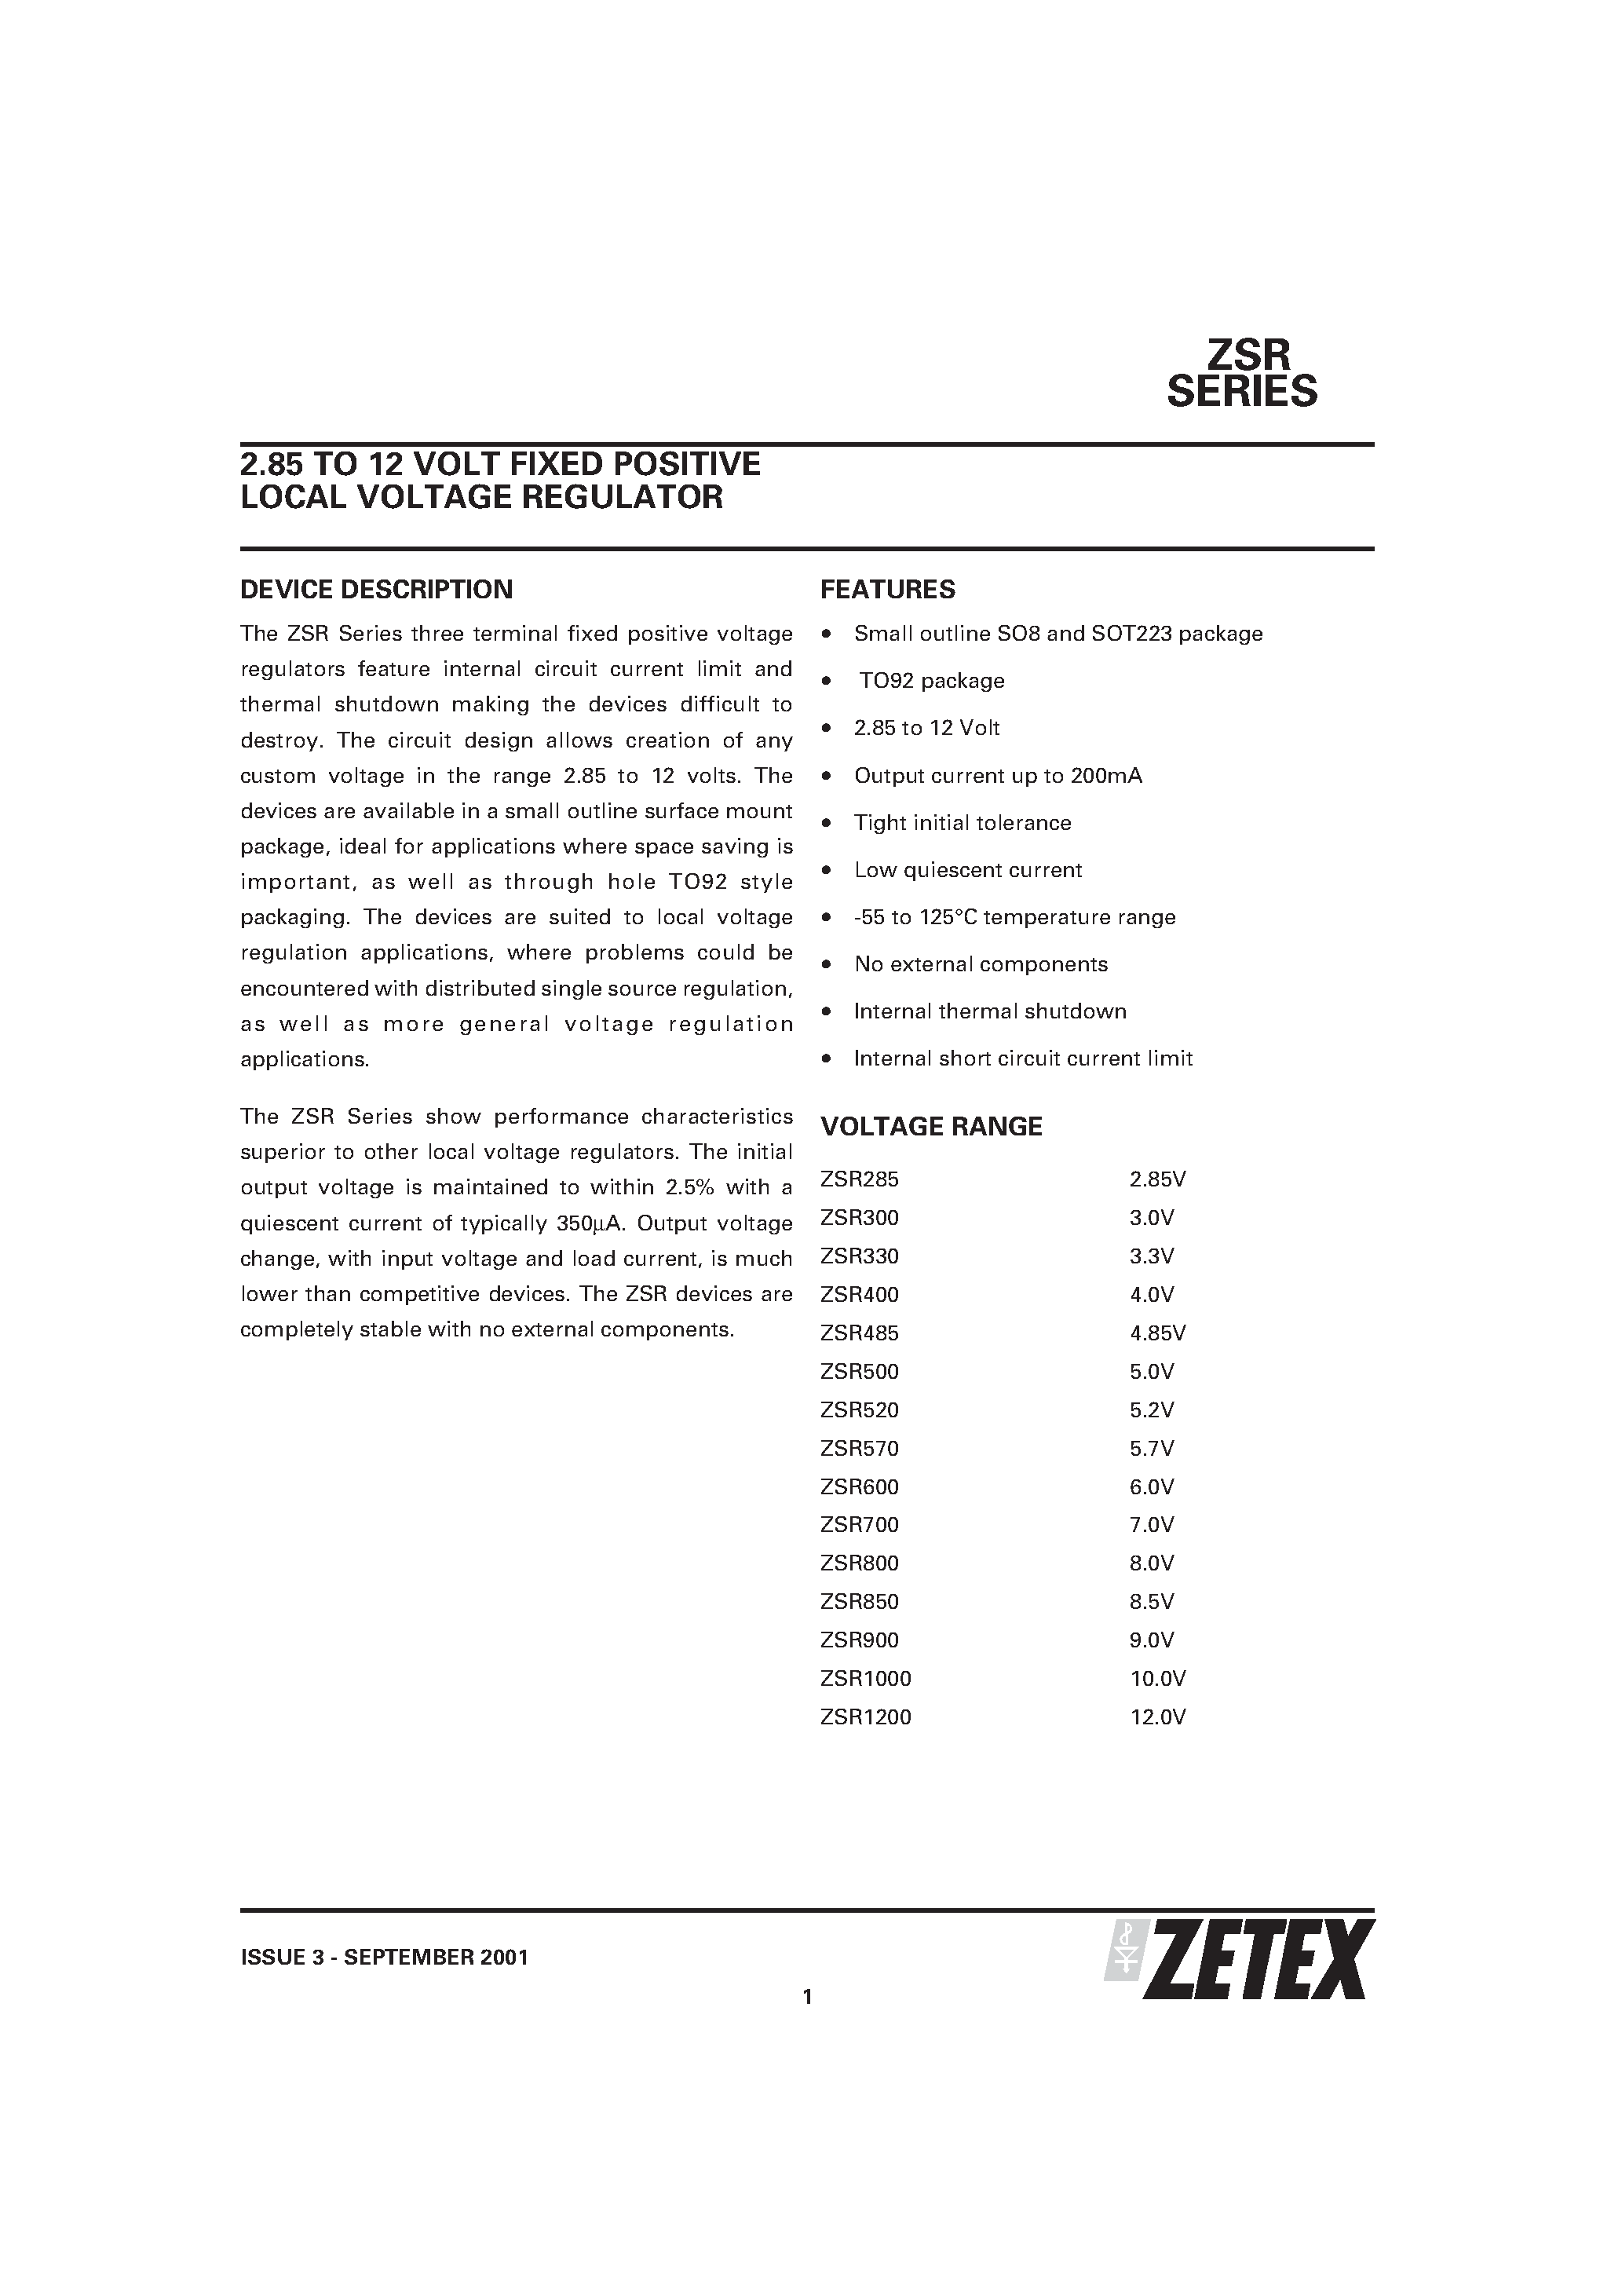 Datasheet ZSR570 - 2.85 TO 12 VOLT FIXED POSITIVE LOCAL VOLTAGE REGULATOR page 1